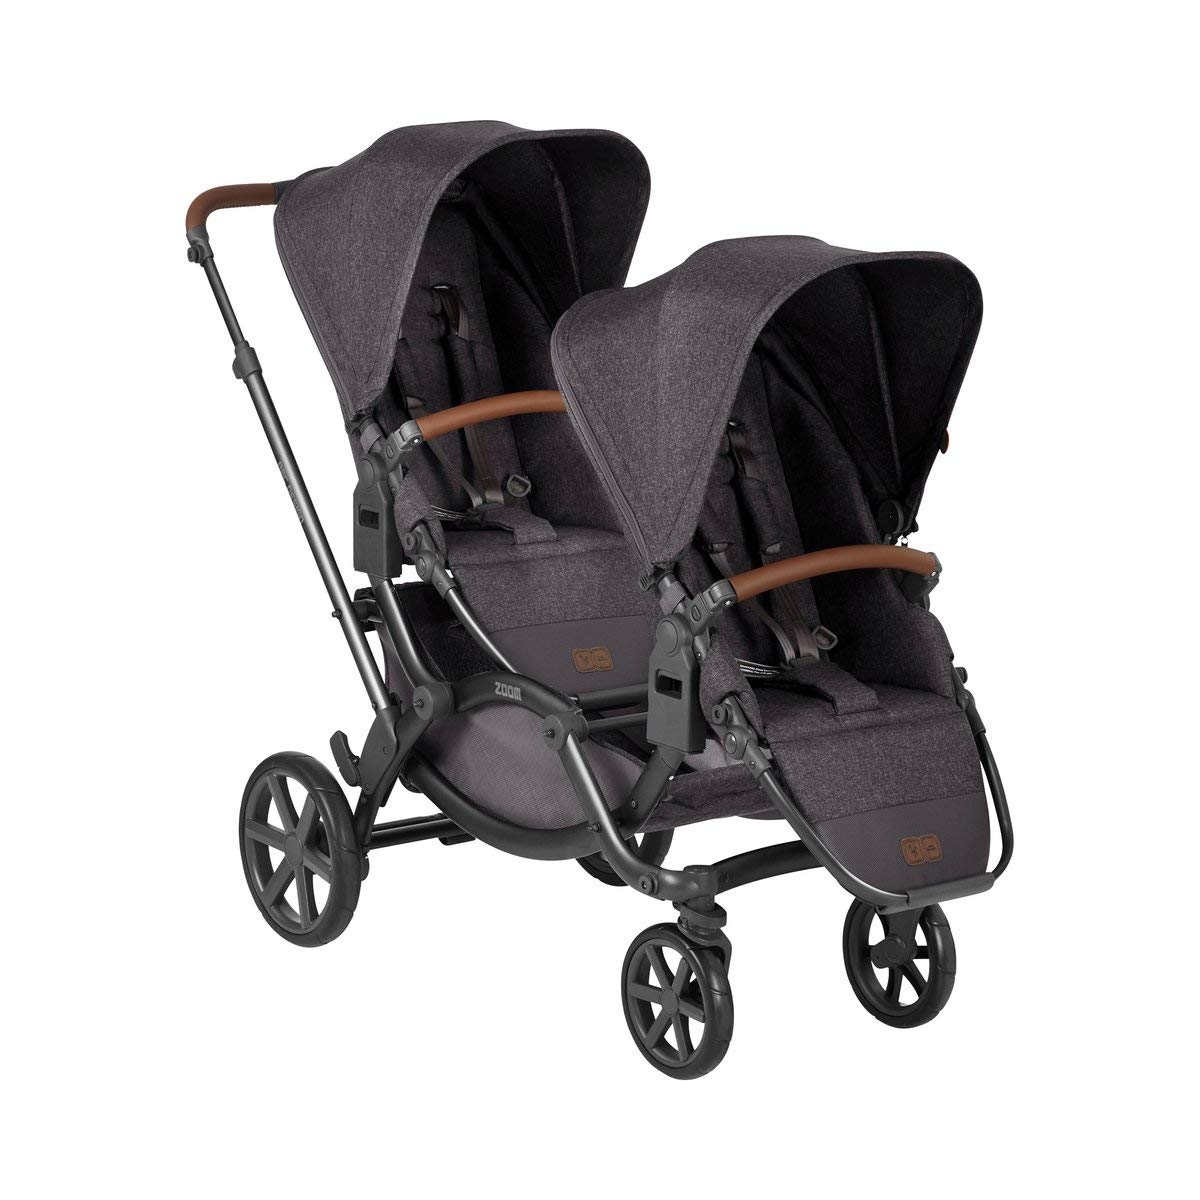 ABC Design Zoom Sibling Pushchair - Twin and Sibling Pushchair for Newborns & Babies - 2 Children - Includes 2 x Buggy Sports Seat - Wheel Suspension - Colour: Street